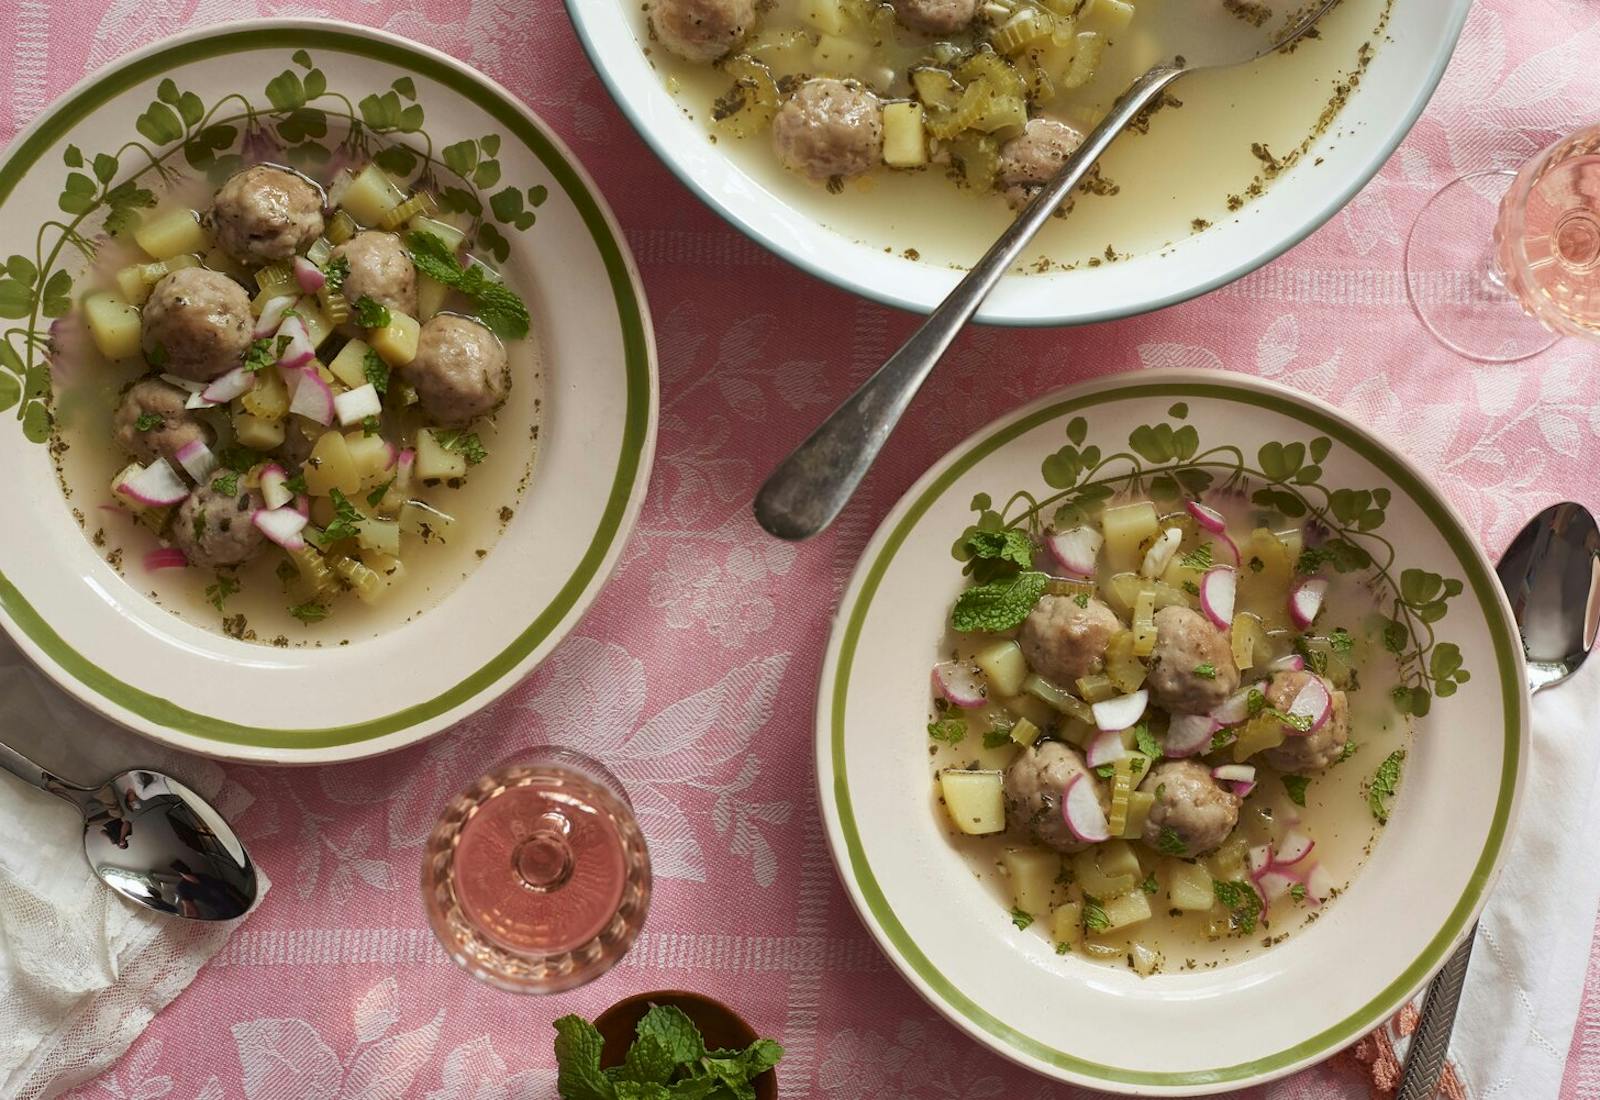 Bowls of hamod with fresh radish and mint, glasses of white wine, atop pink tablecloth.